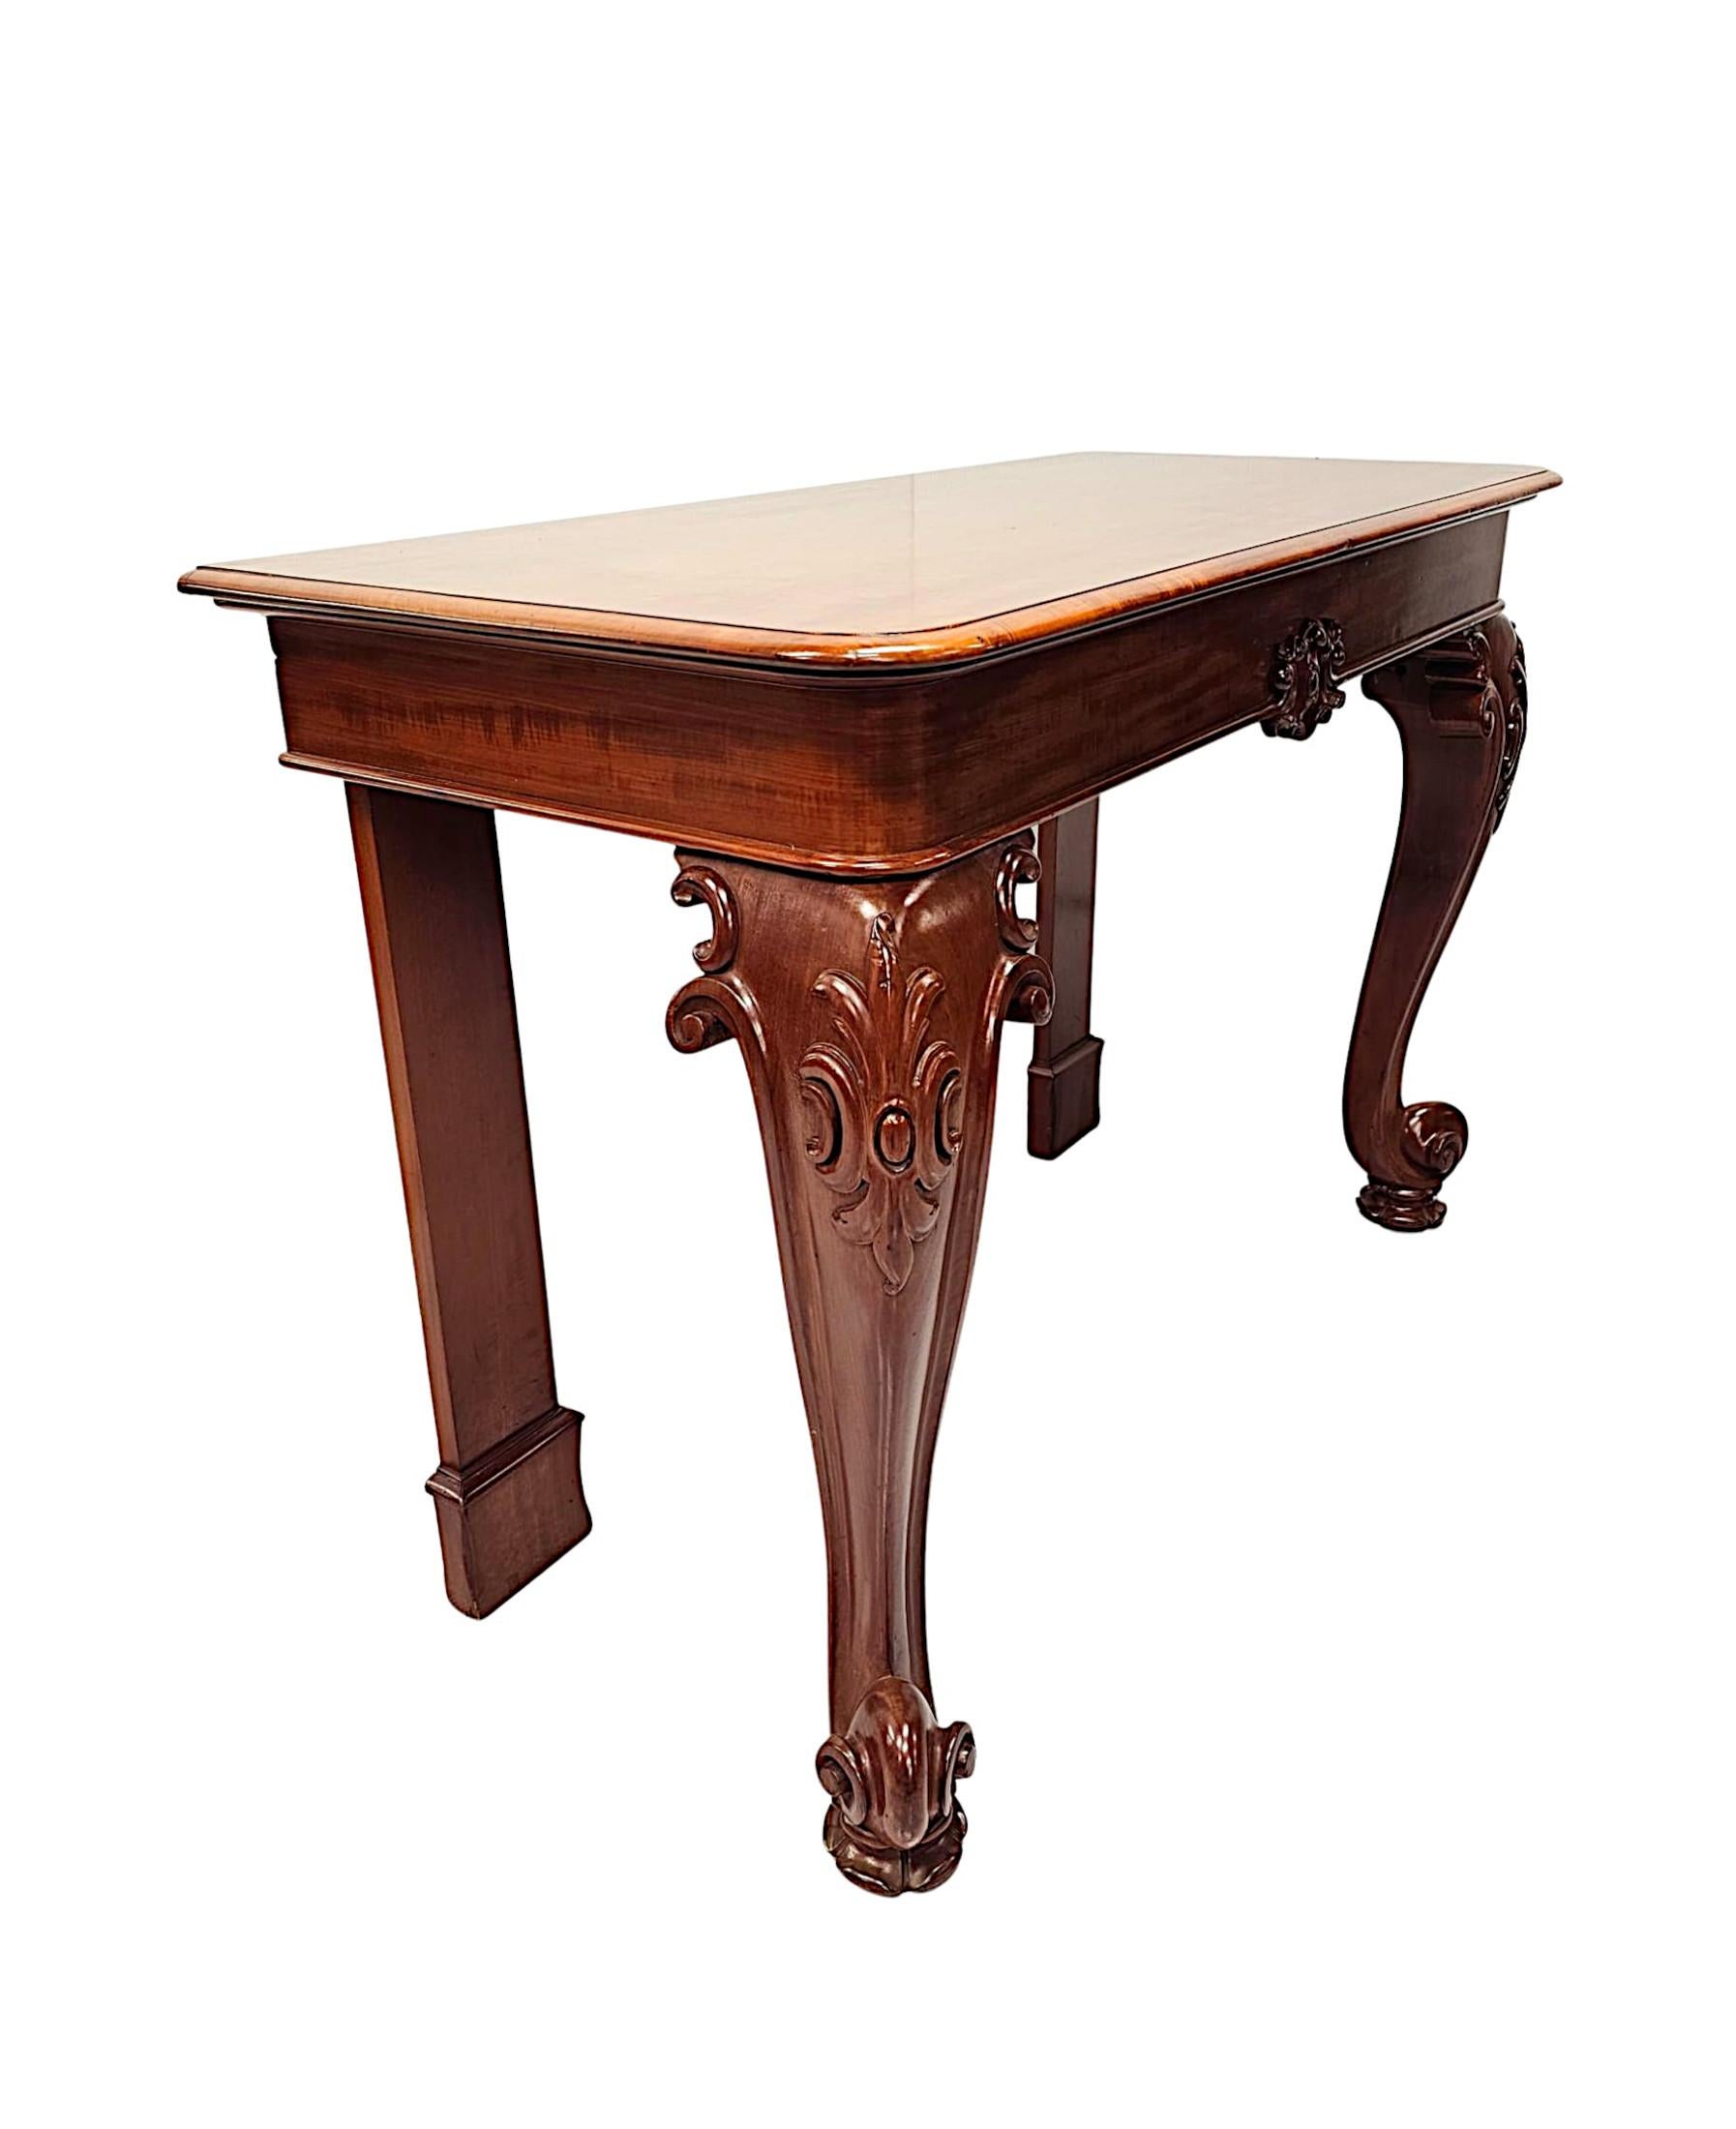  A Very Fine 19th Century Mahogany Console Table For Sale 1